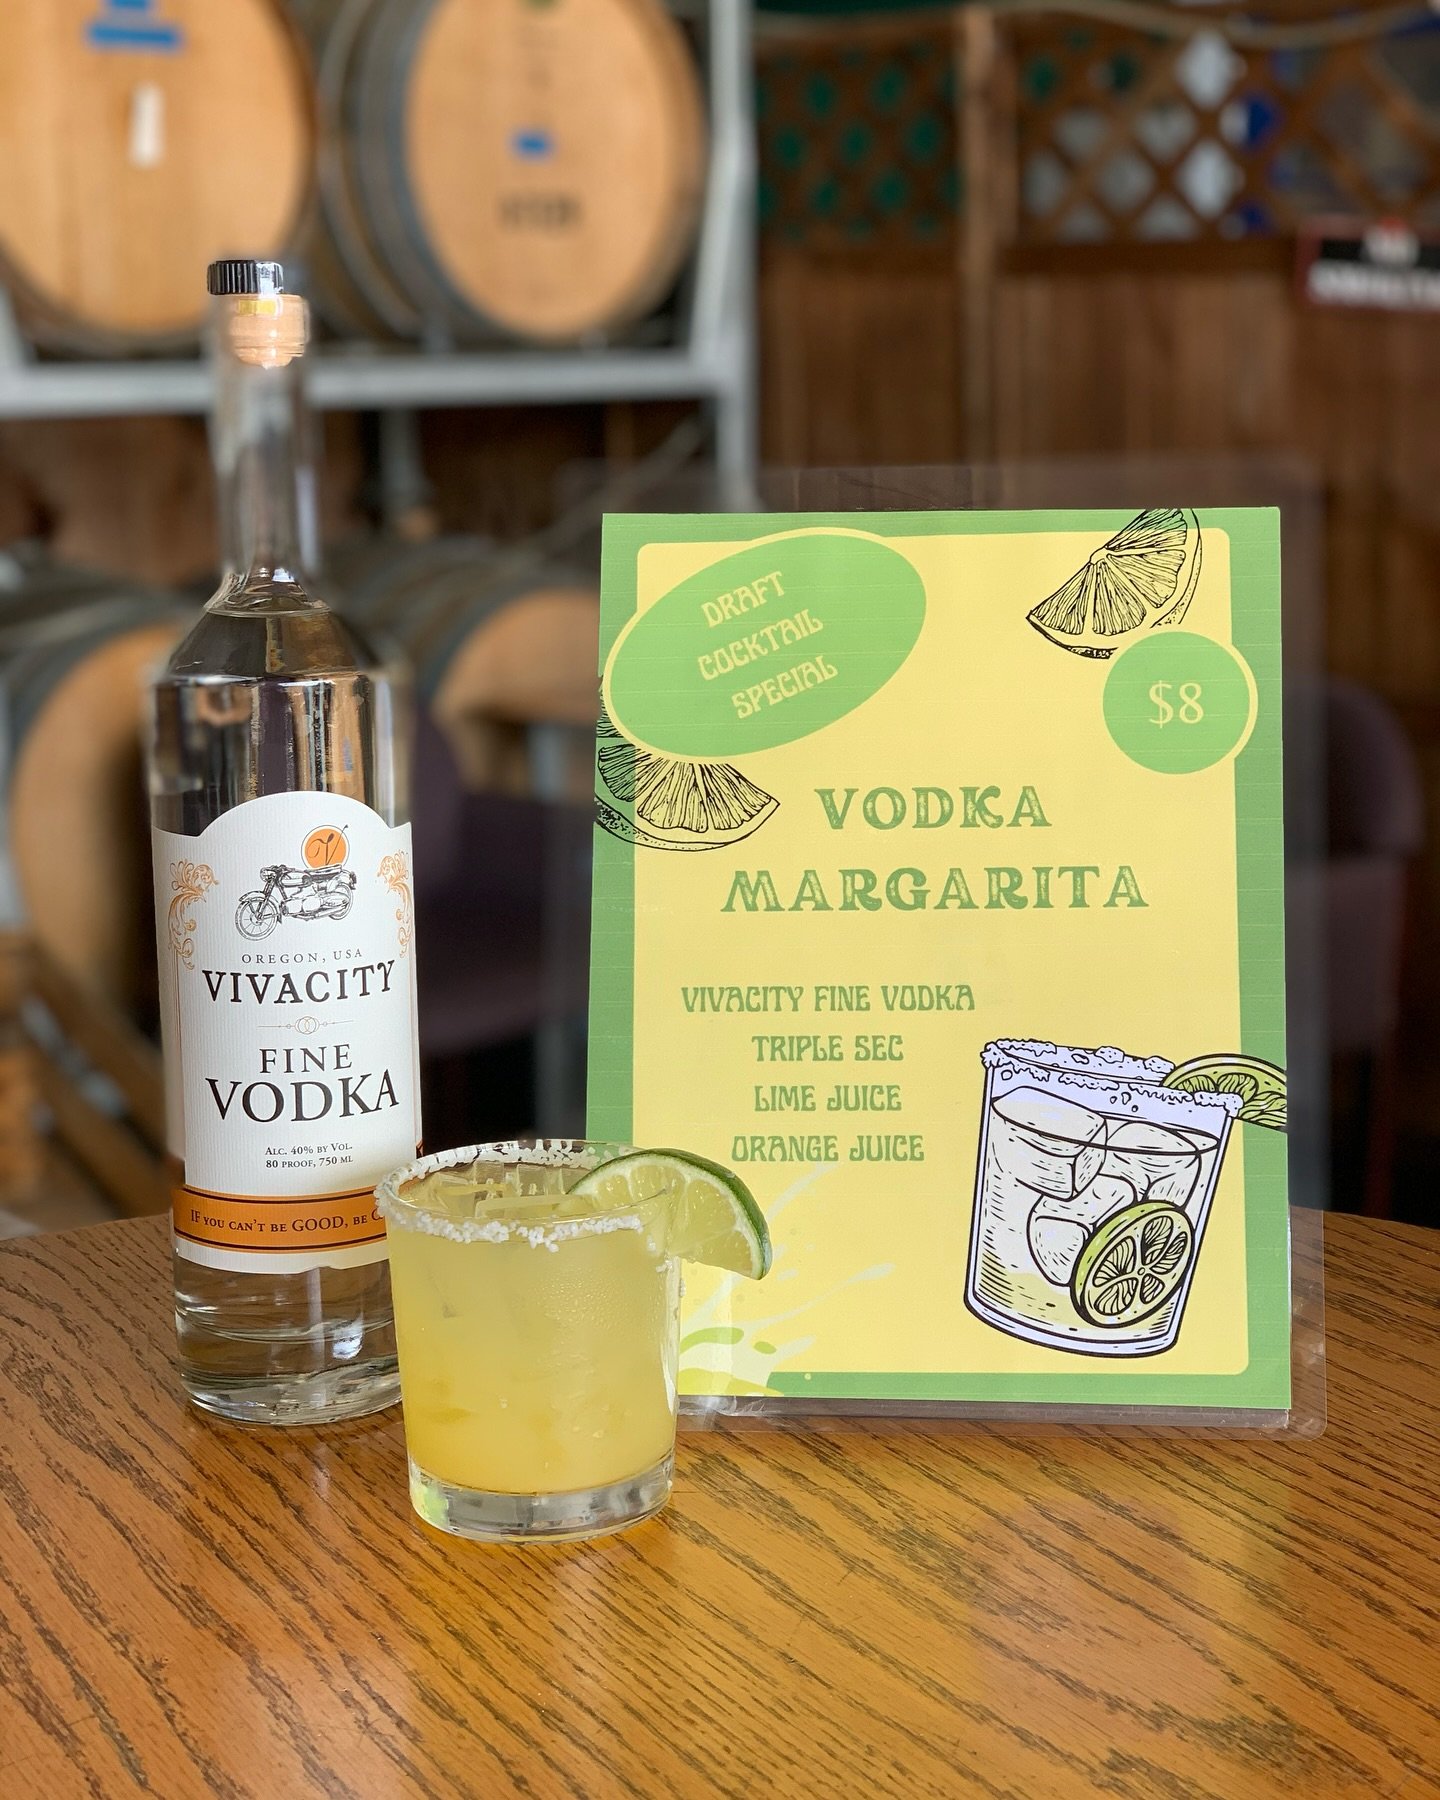 We have the perfect cocktail for this warm week ahead. A Vodka &ldquo;Margarita&rdquo; featuring Vivacity Fine Vodka.